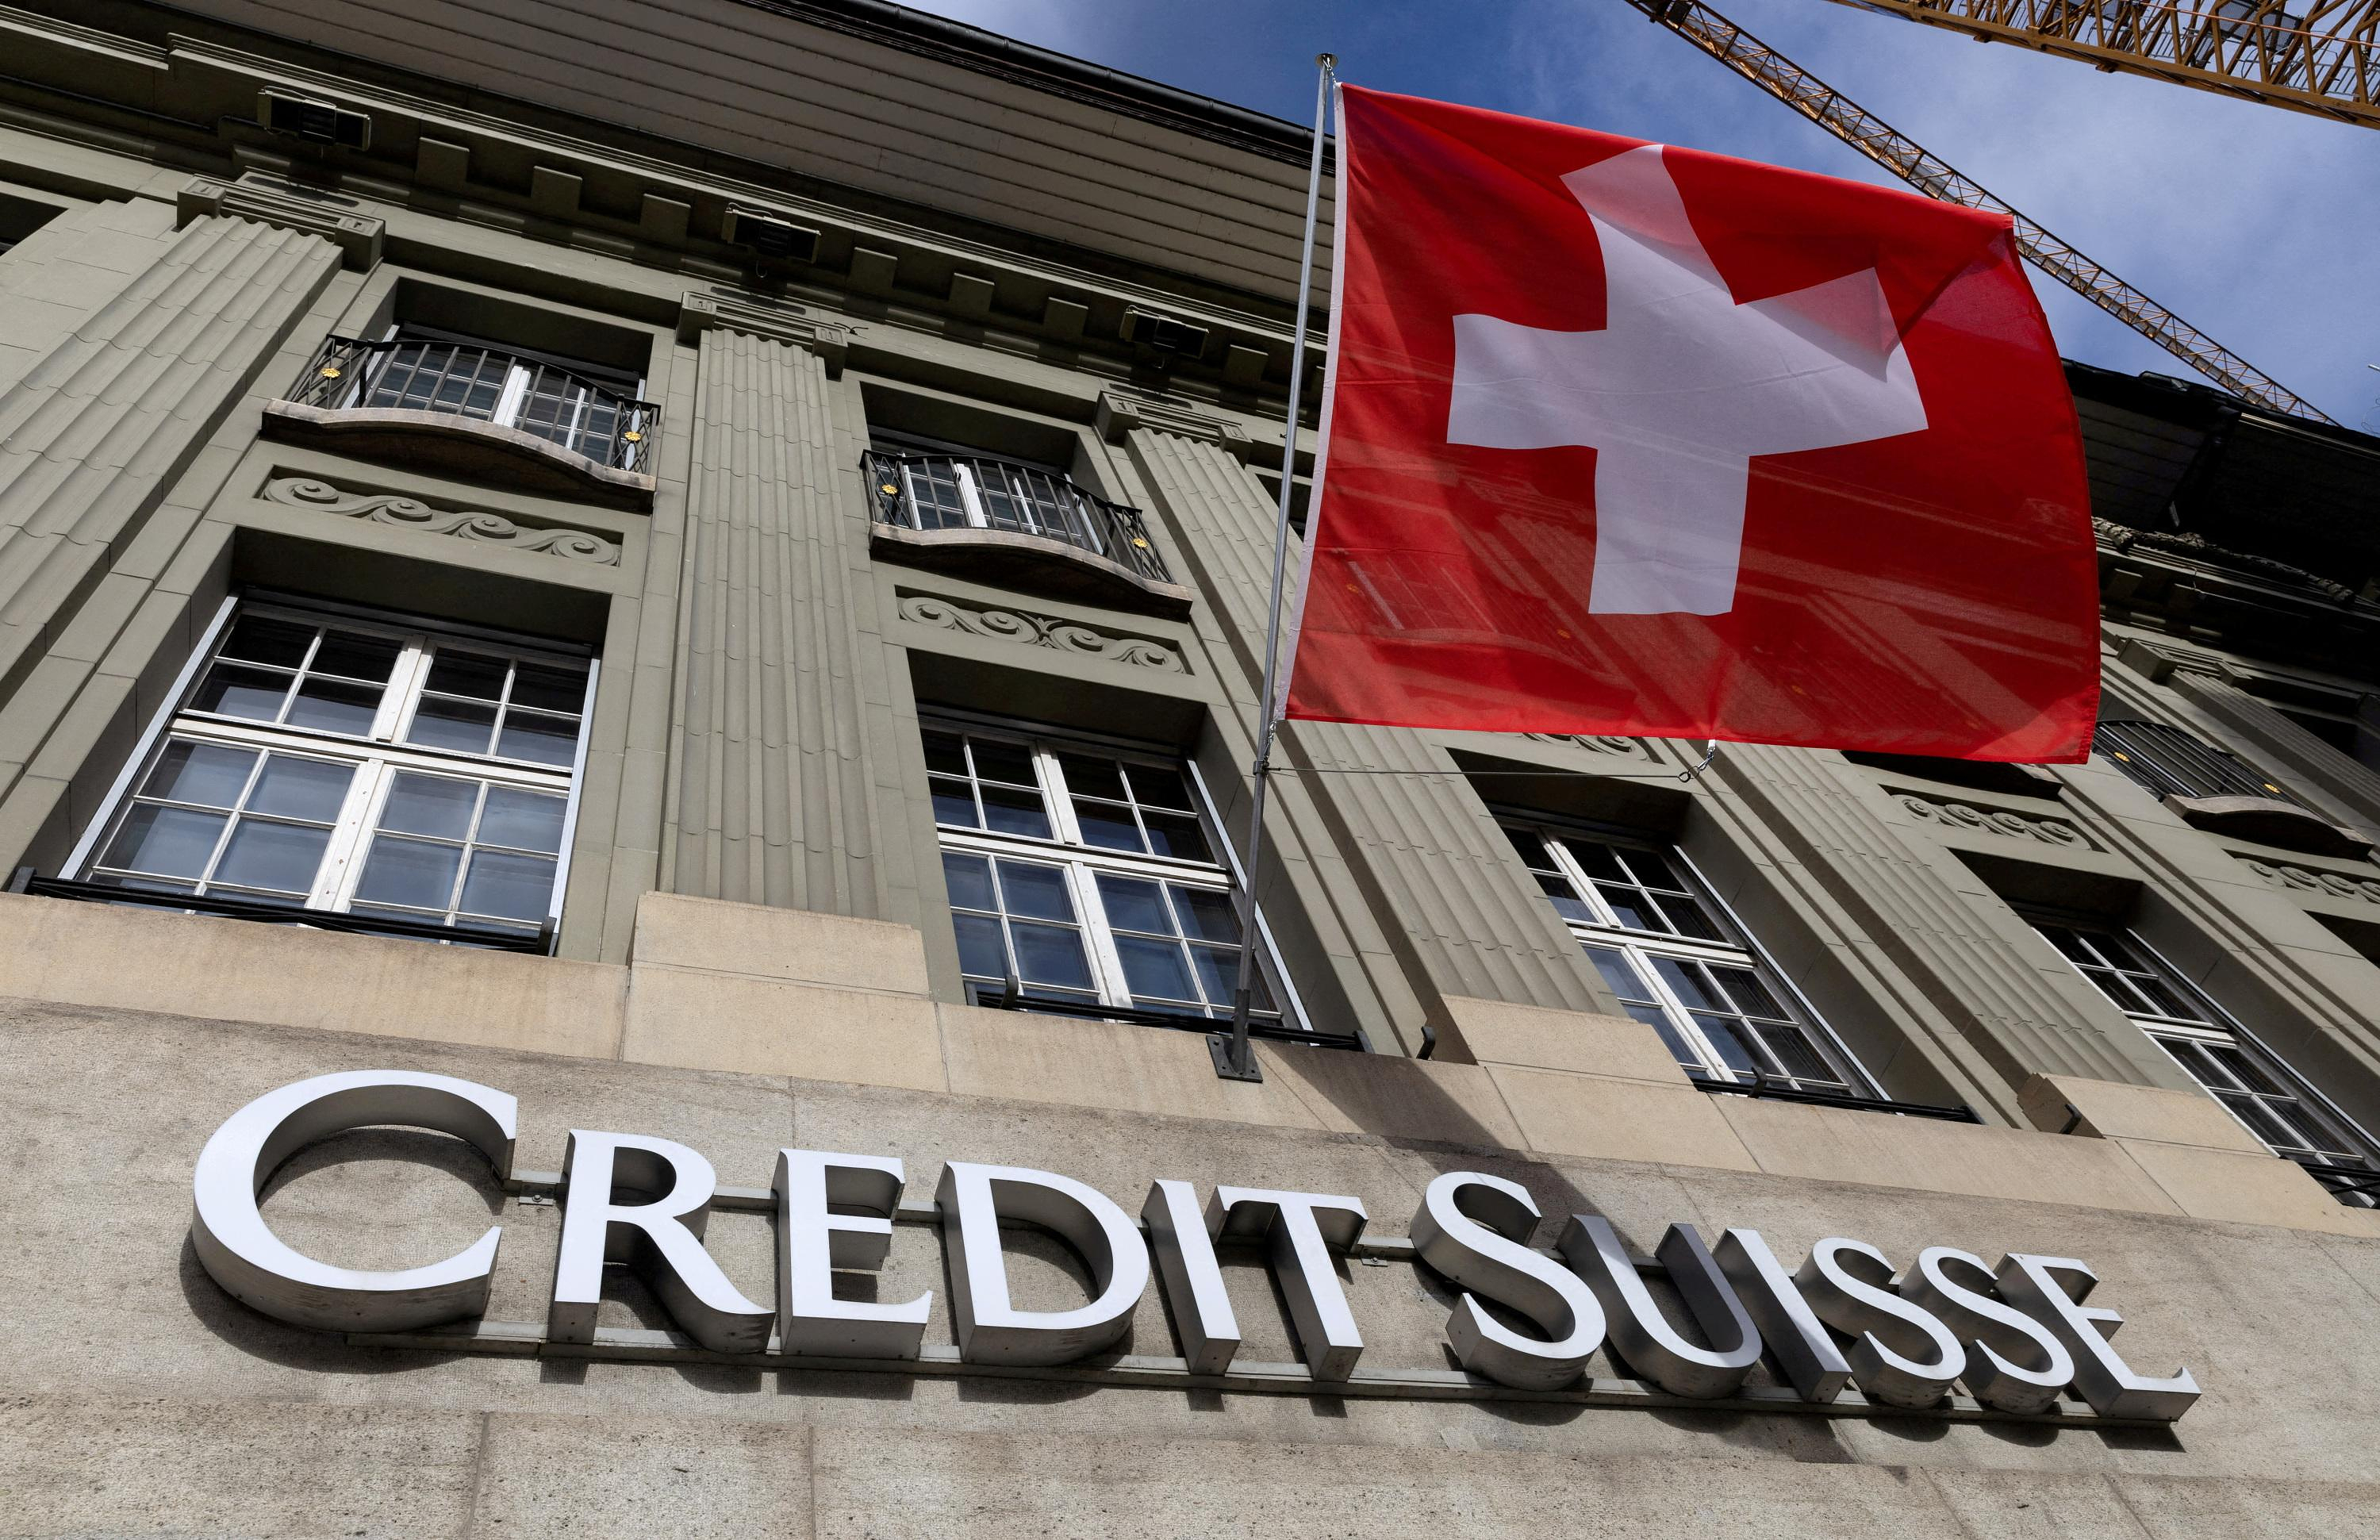 Despite accounts in the red, Credit Suisse would have paid 32 billion in premiums in 10 years